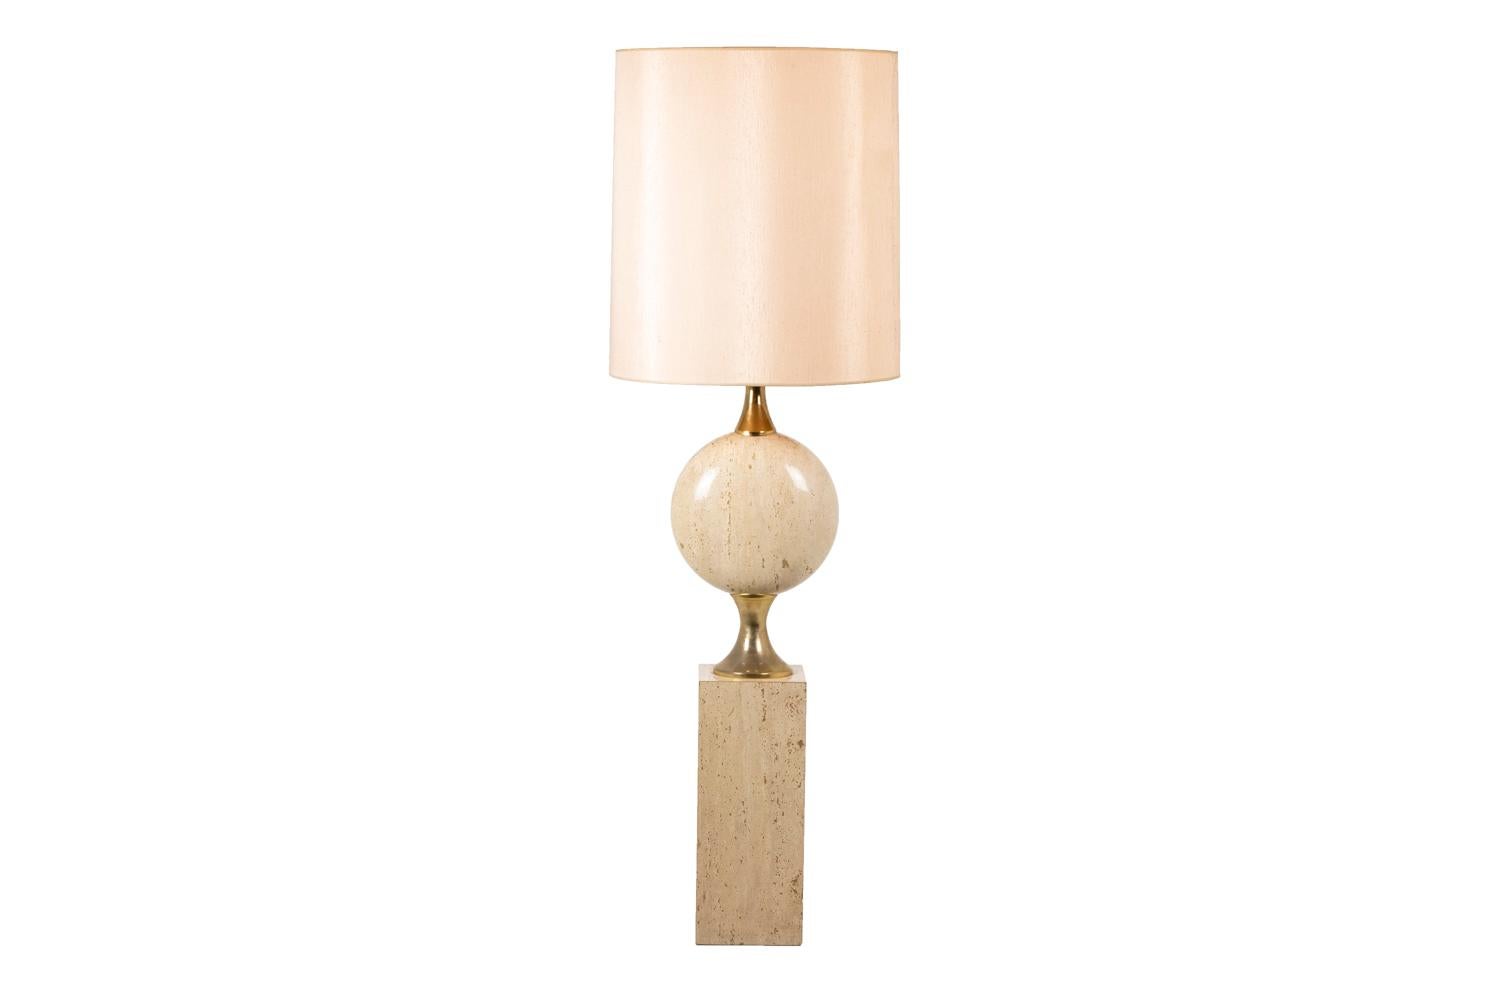 Philippe Barbier, attributed to. 

Lamp composed of a rectangular base and a central flattened sphere in travertine. The two parts are linked by mounts in gilt brass. Lampshades in fabric.

Work realized in the 1970s.
  